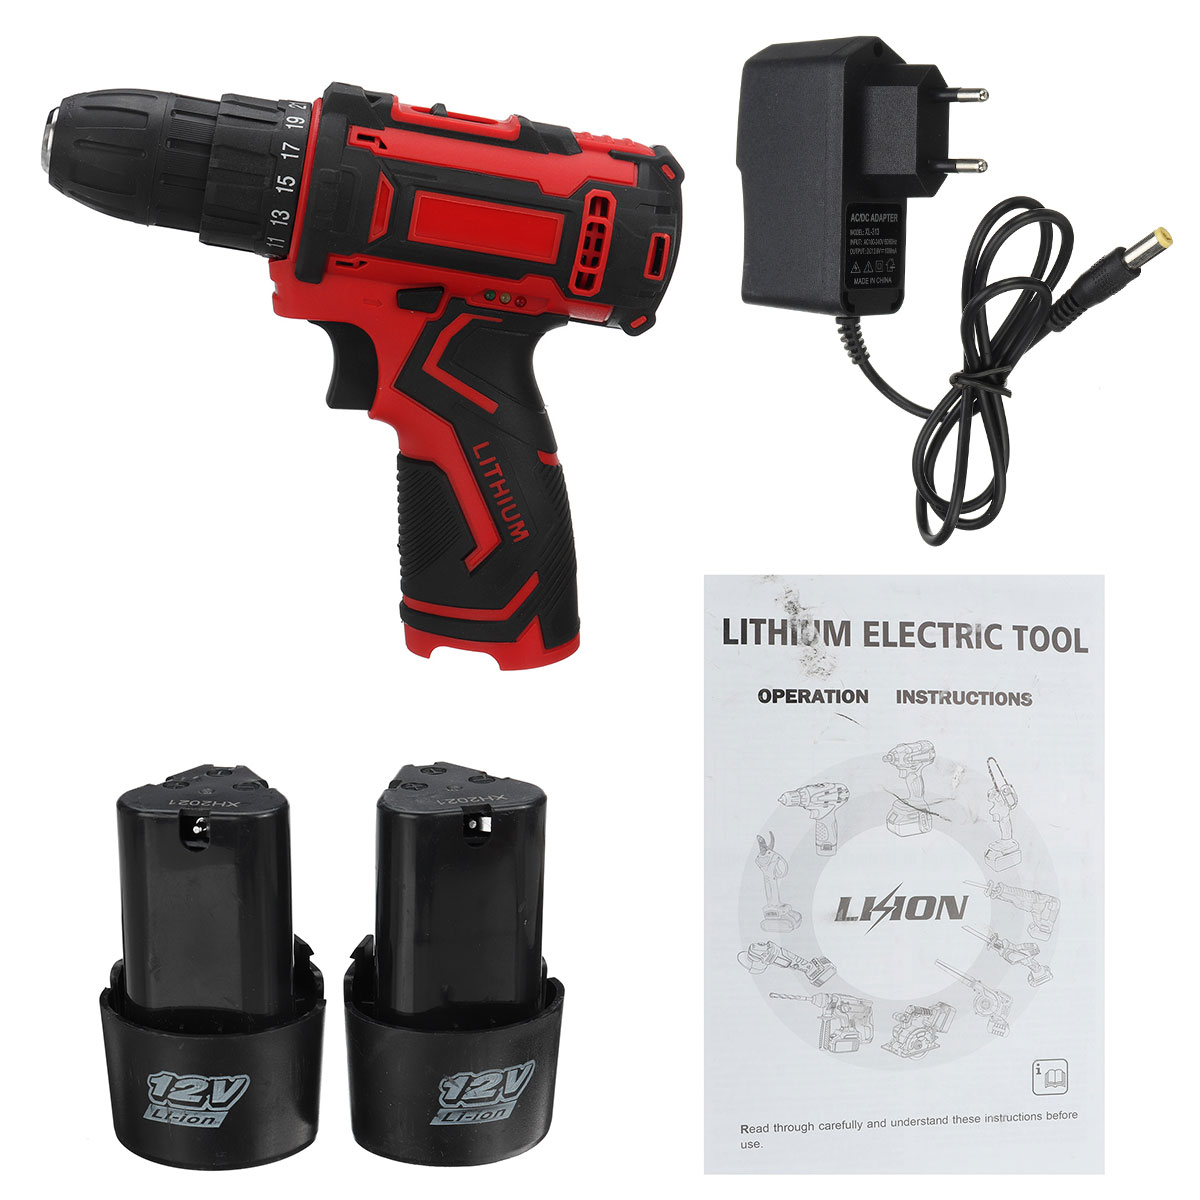 12V-300W-2-Speed-Cordless-Drill-Driver-251-Torque-1350-RPM-10mm-Electric-Screwdriver-W-12-Battery-1867946-7